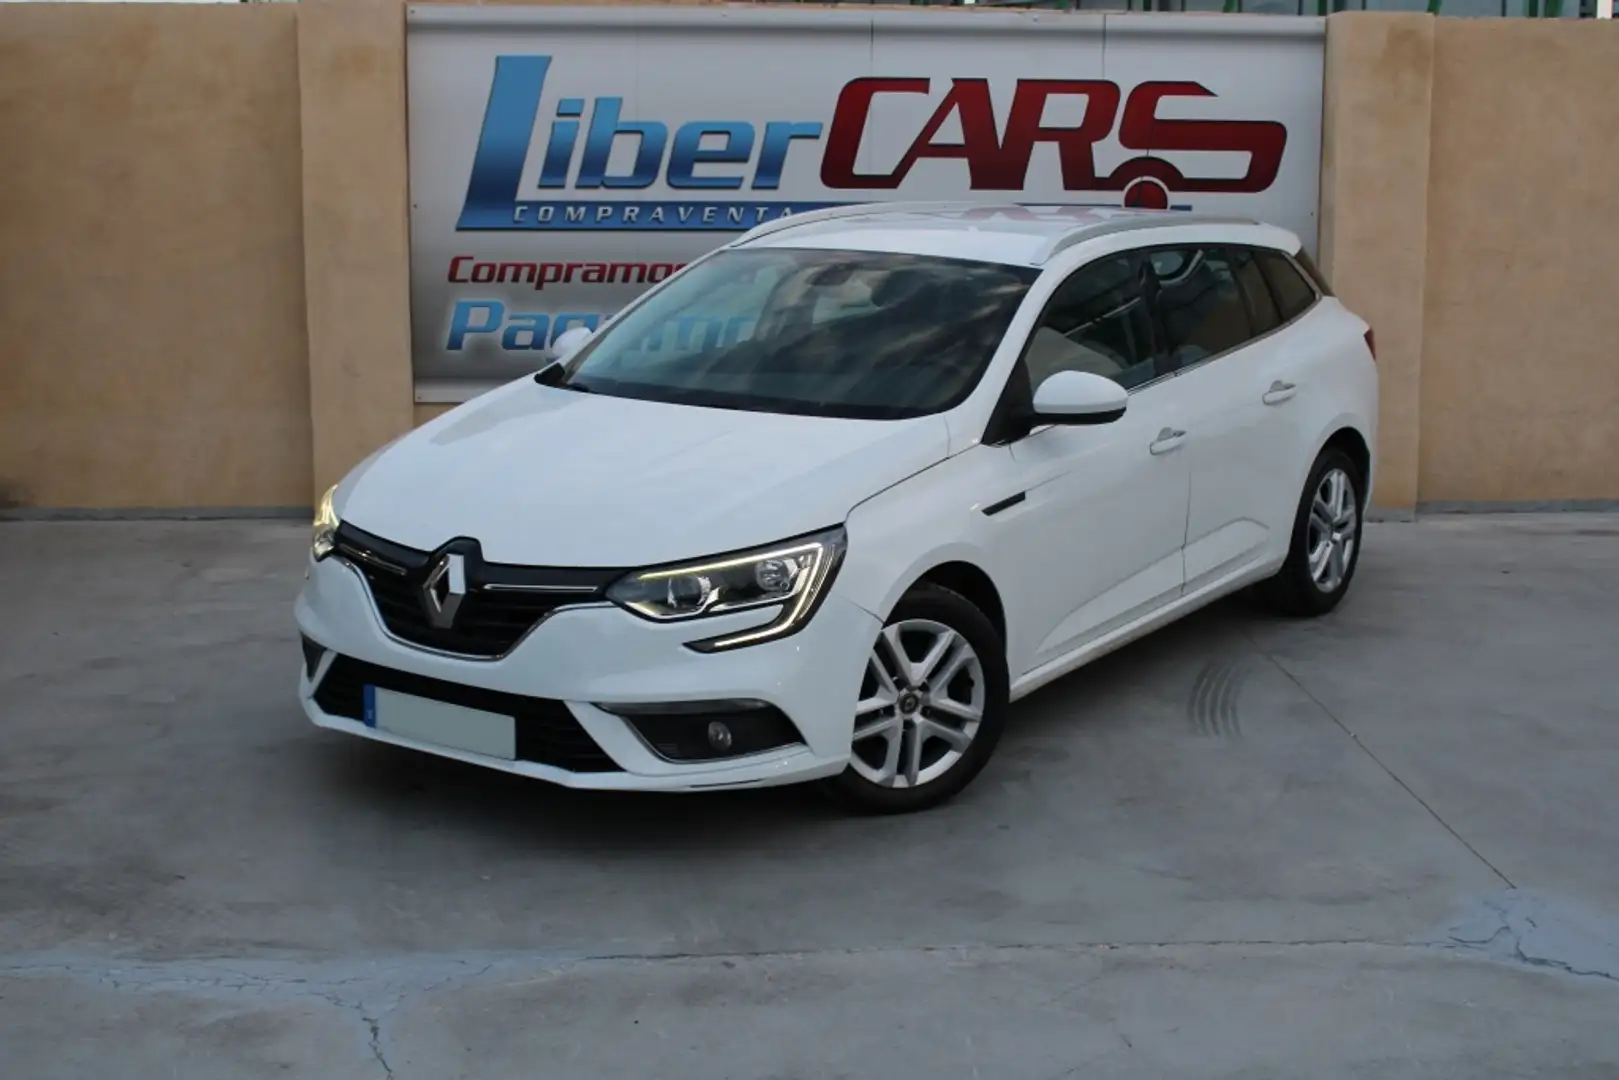 Renault Megane S.T. 1.5dCi Energy Business 81kW Bianco - 2